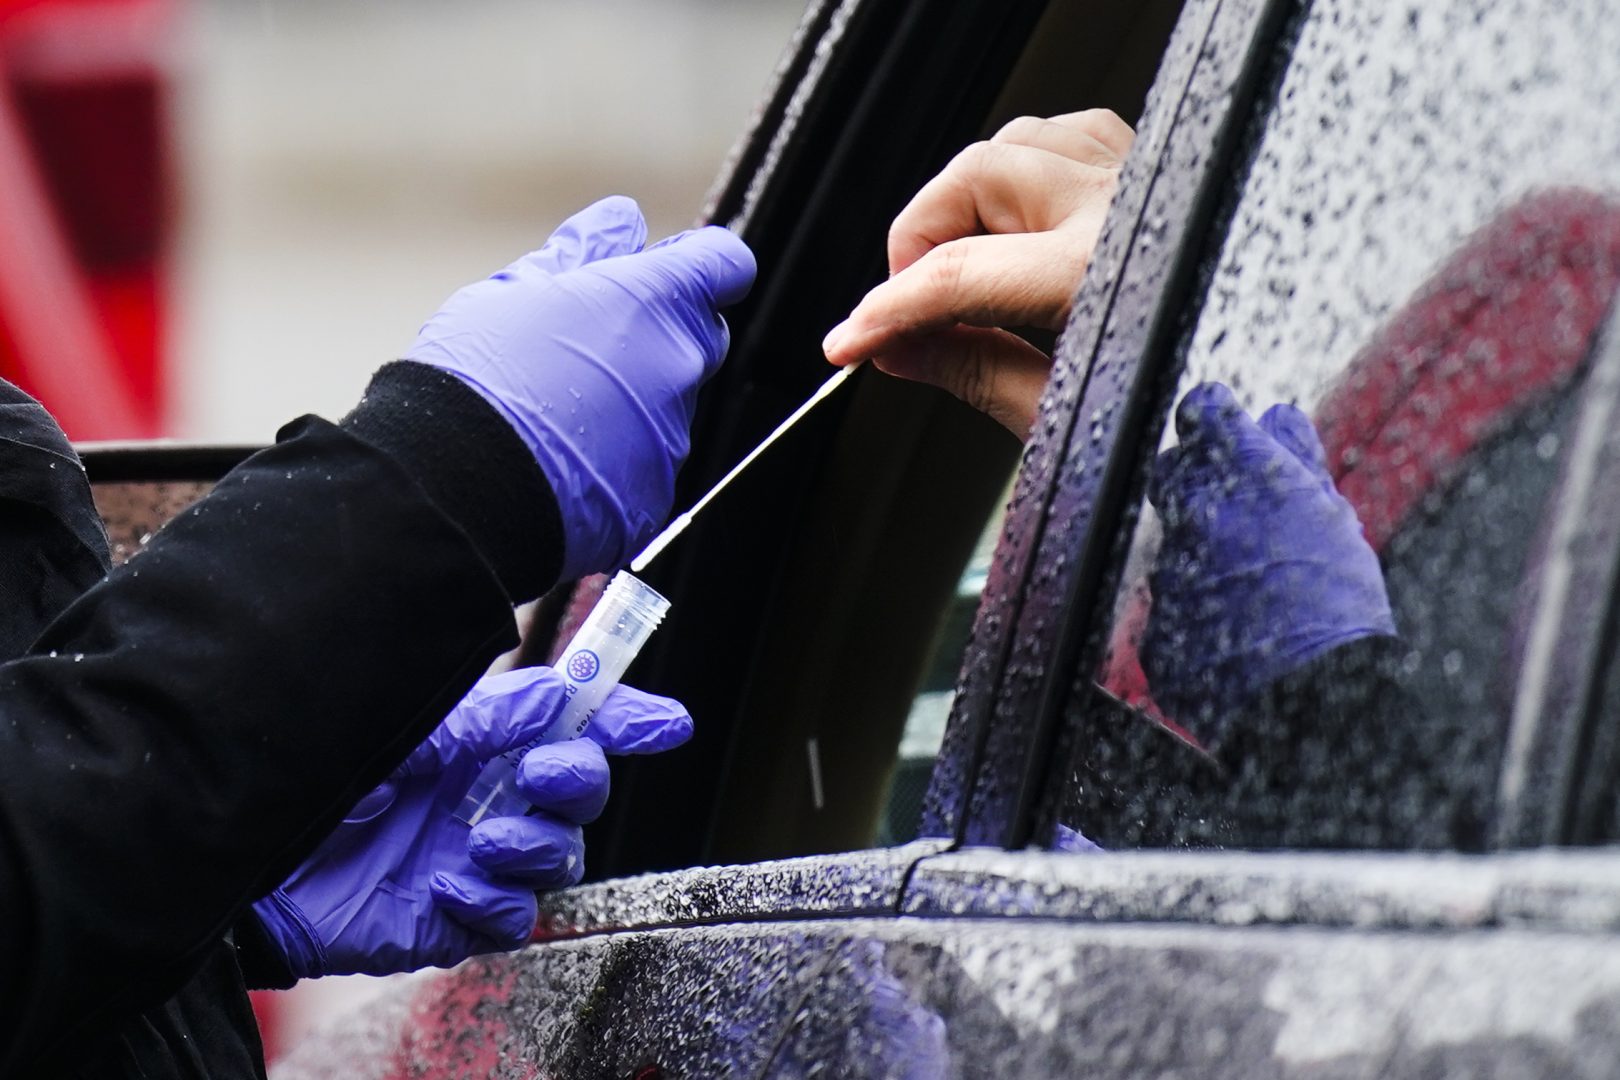 FILE - A driver places a swab into a vial at a free drive-thru COVID-19 testing site in the parking lot of the Mercy Fitzgerald Hospital in Darby, Pa., Thursday, Jan. 20, 2022. A requirement to get vaccinated against COVID-19 kicks in Thursday, Jan. 27,  for millions of health care workers in about half the states. (AP Photo/Matt Rourke, File)